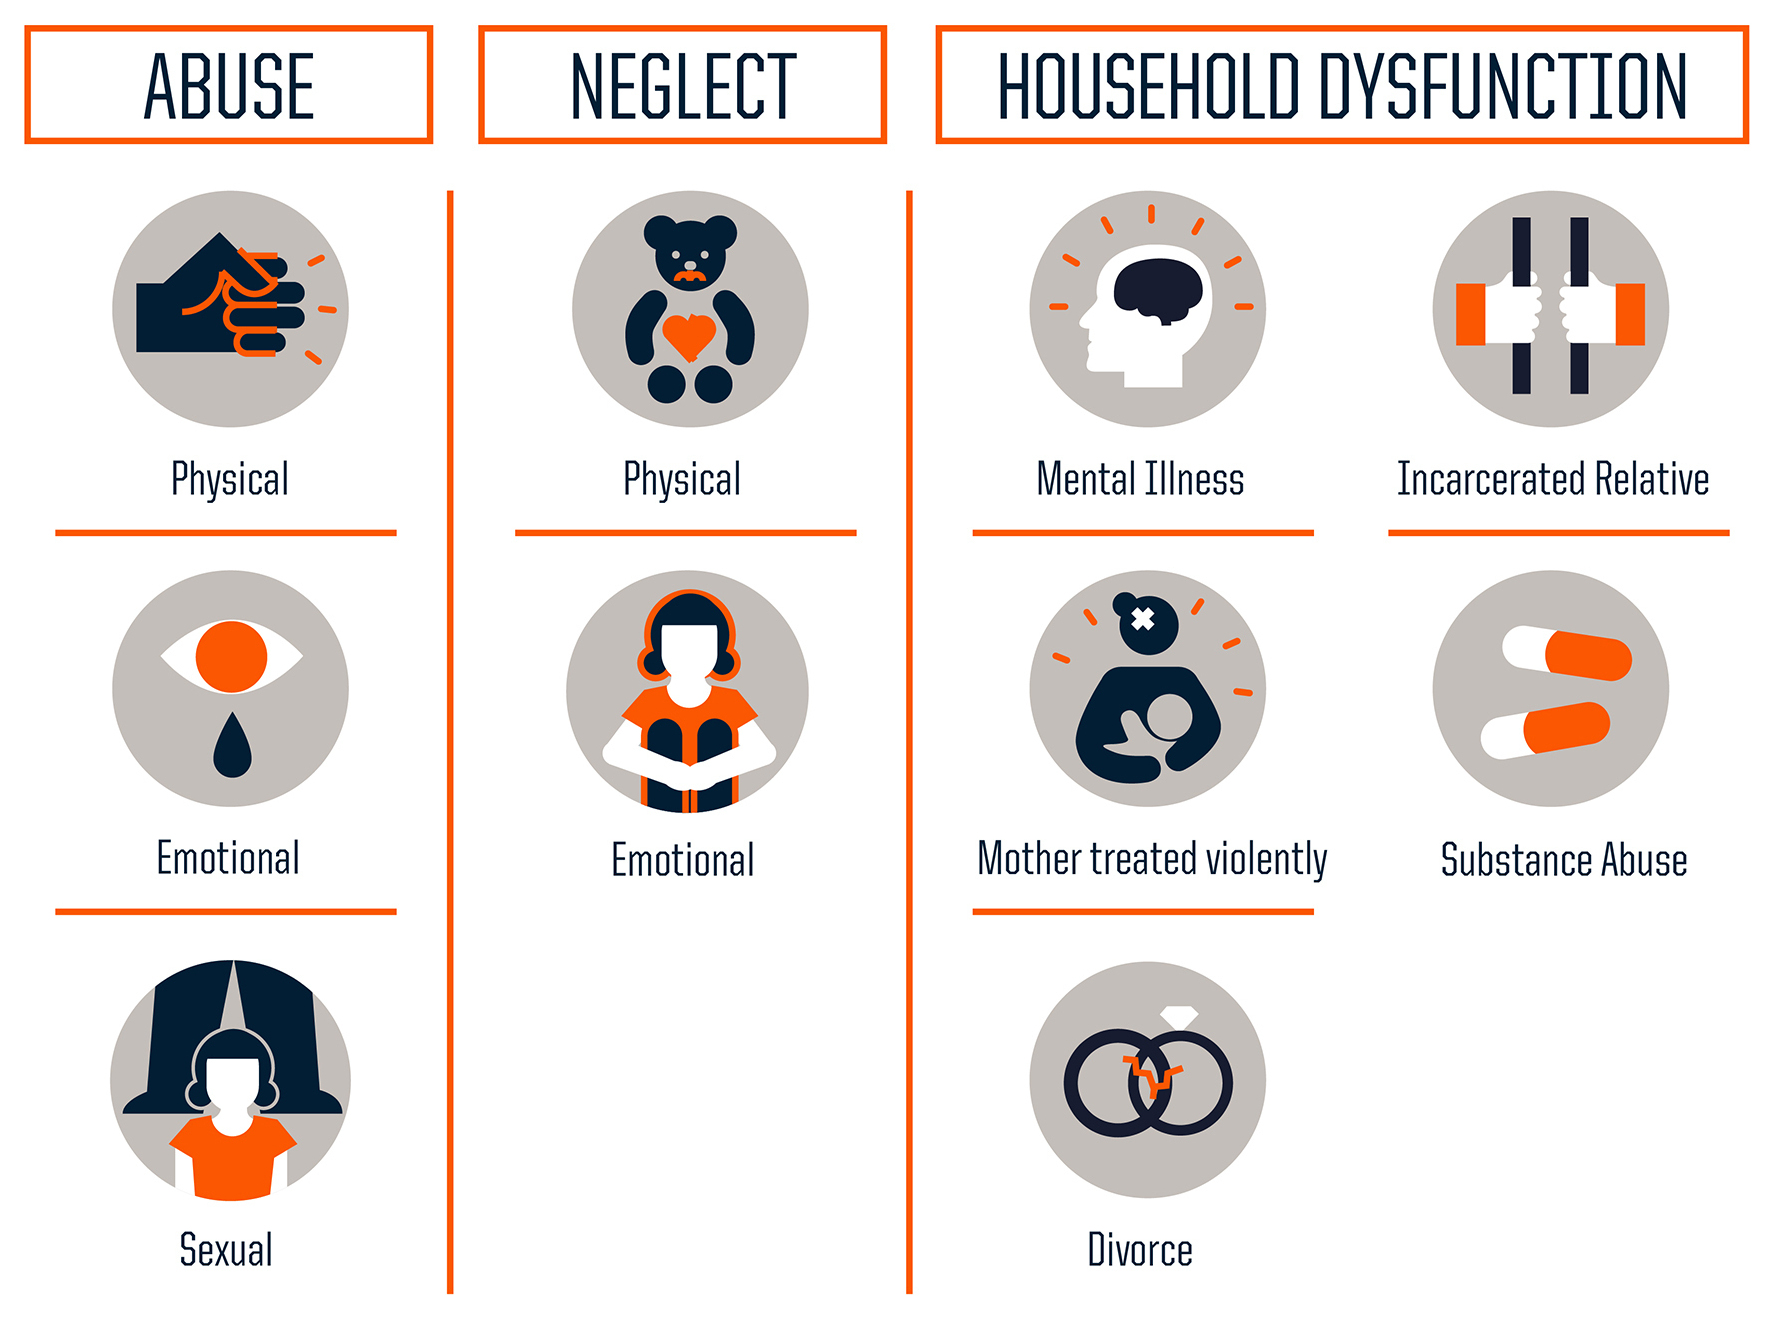 The three types of ACEs include abuse, neglect and household dysfunction